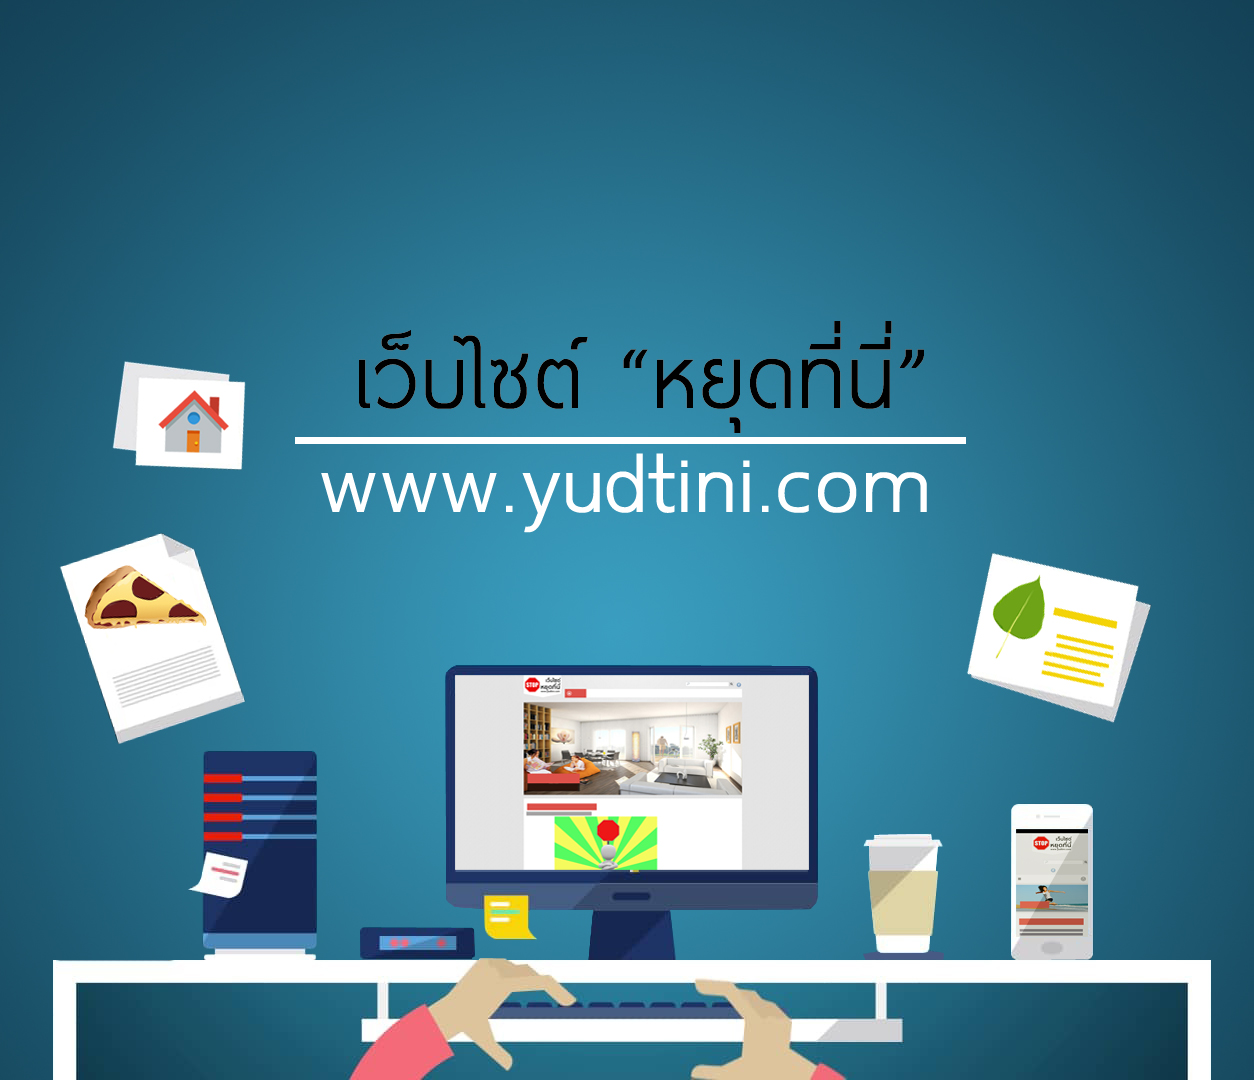 Website Yudtini - Good articles about home design, dhamma, health